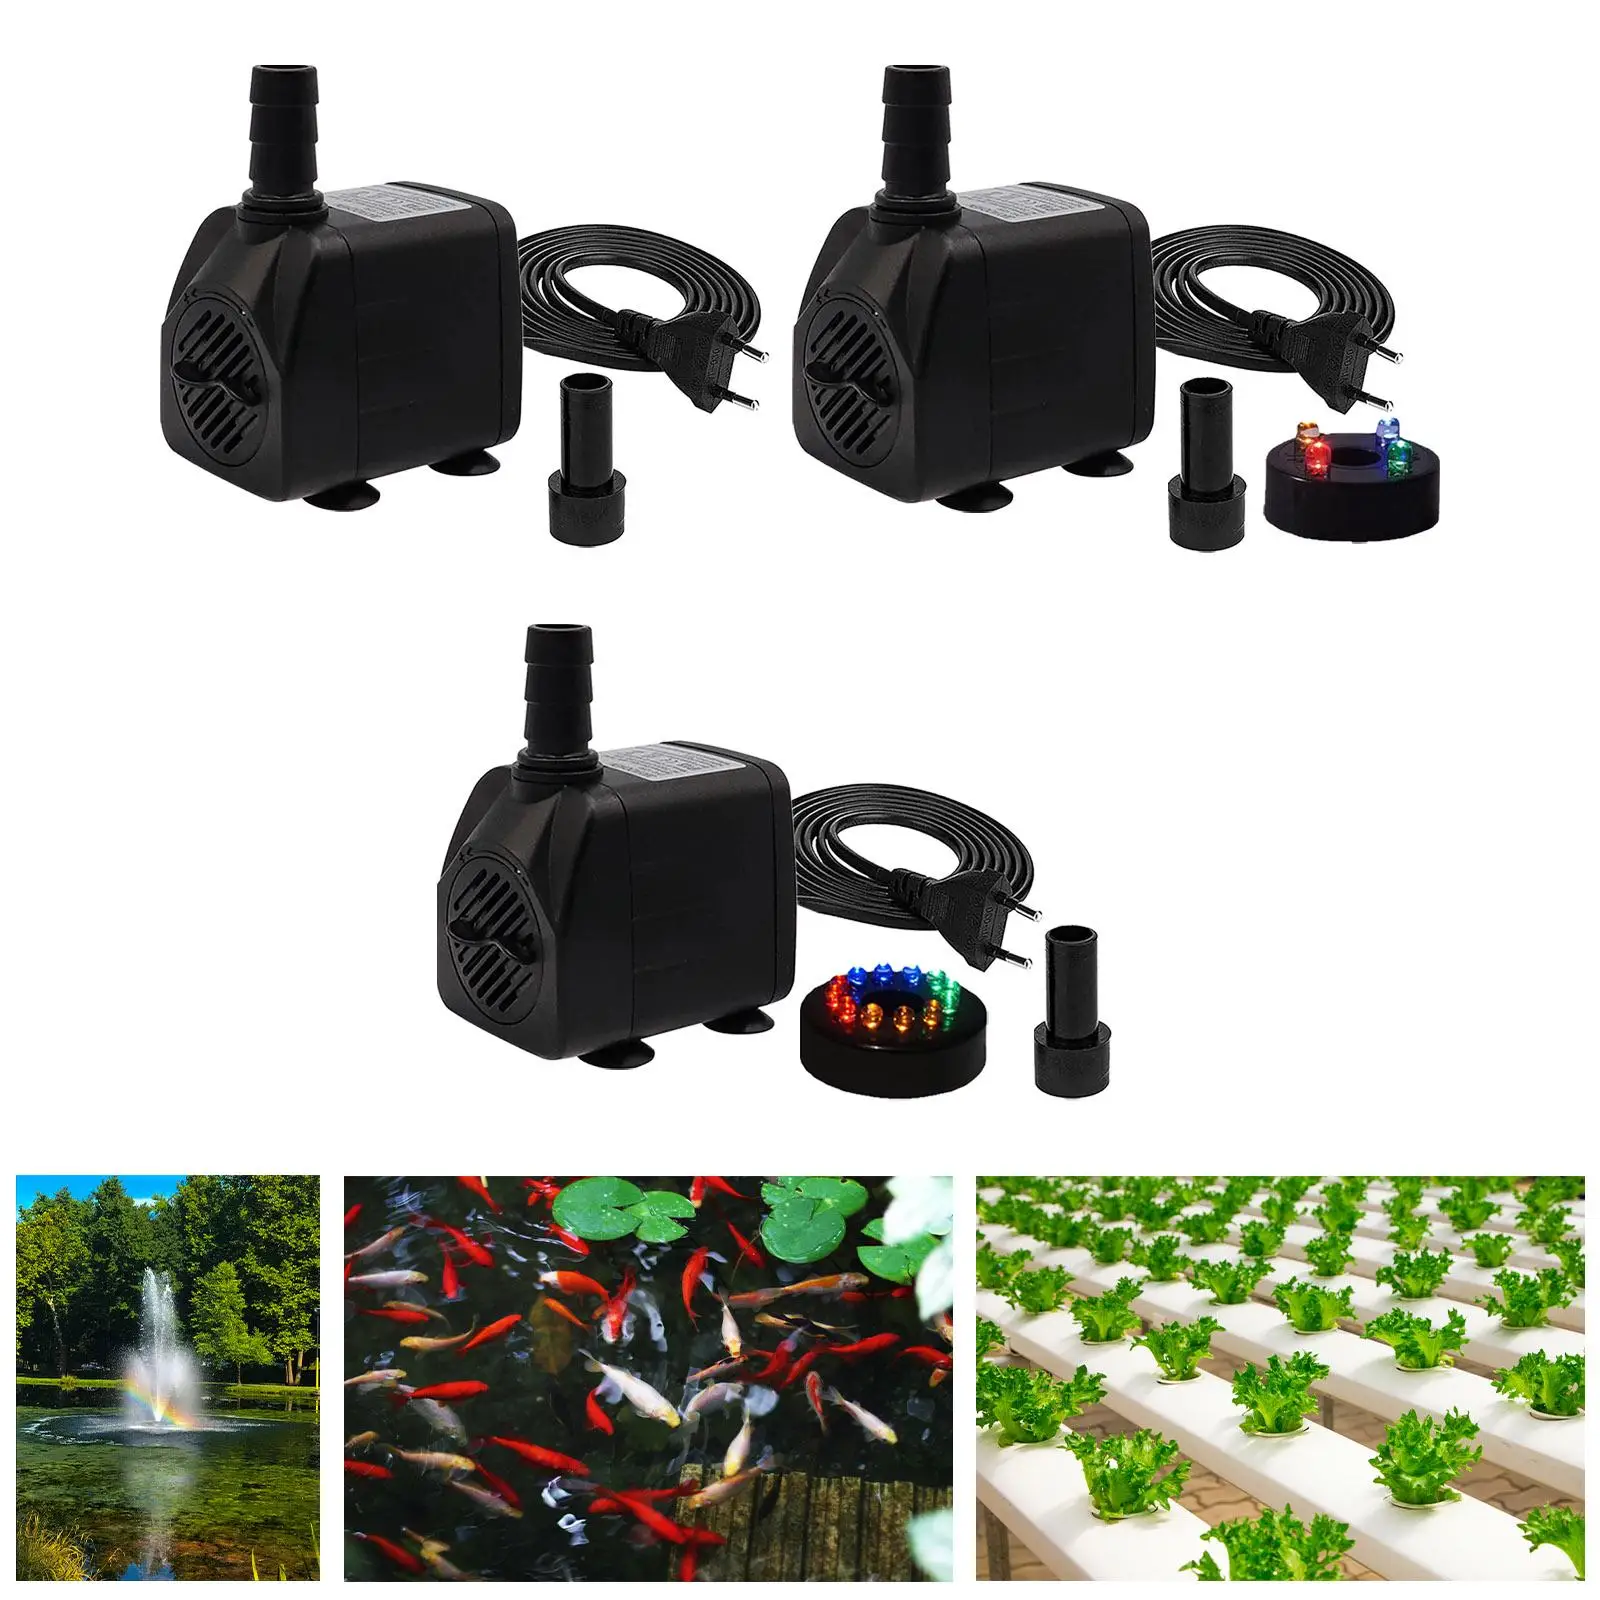 Mini Submersible Pump Adjustable with 1.5 M Power Cable 2 Nozzles Quiet Aquarium Water Pump for Waterfall Water Feature Pond